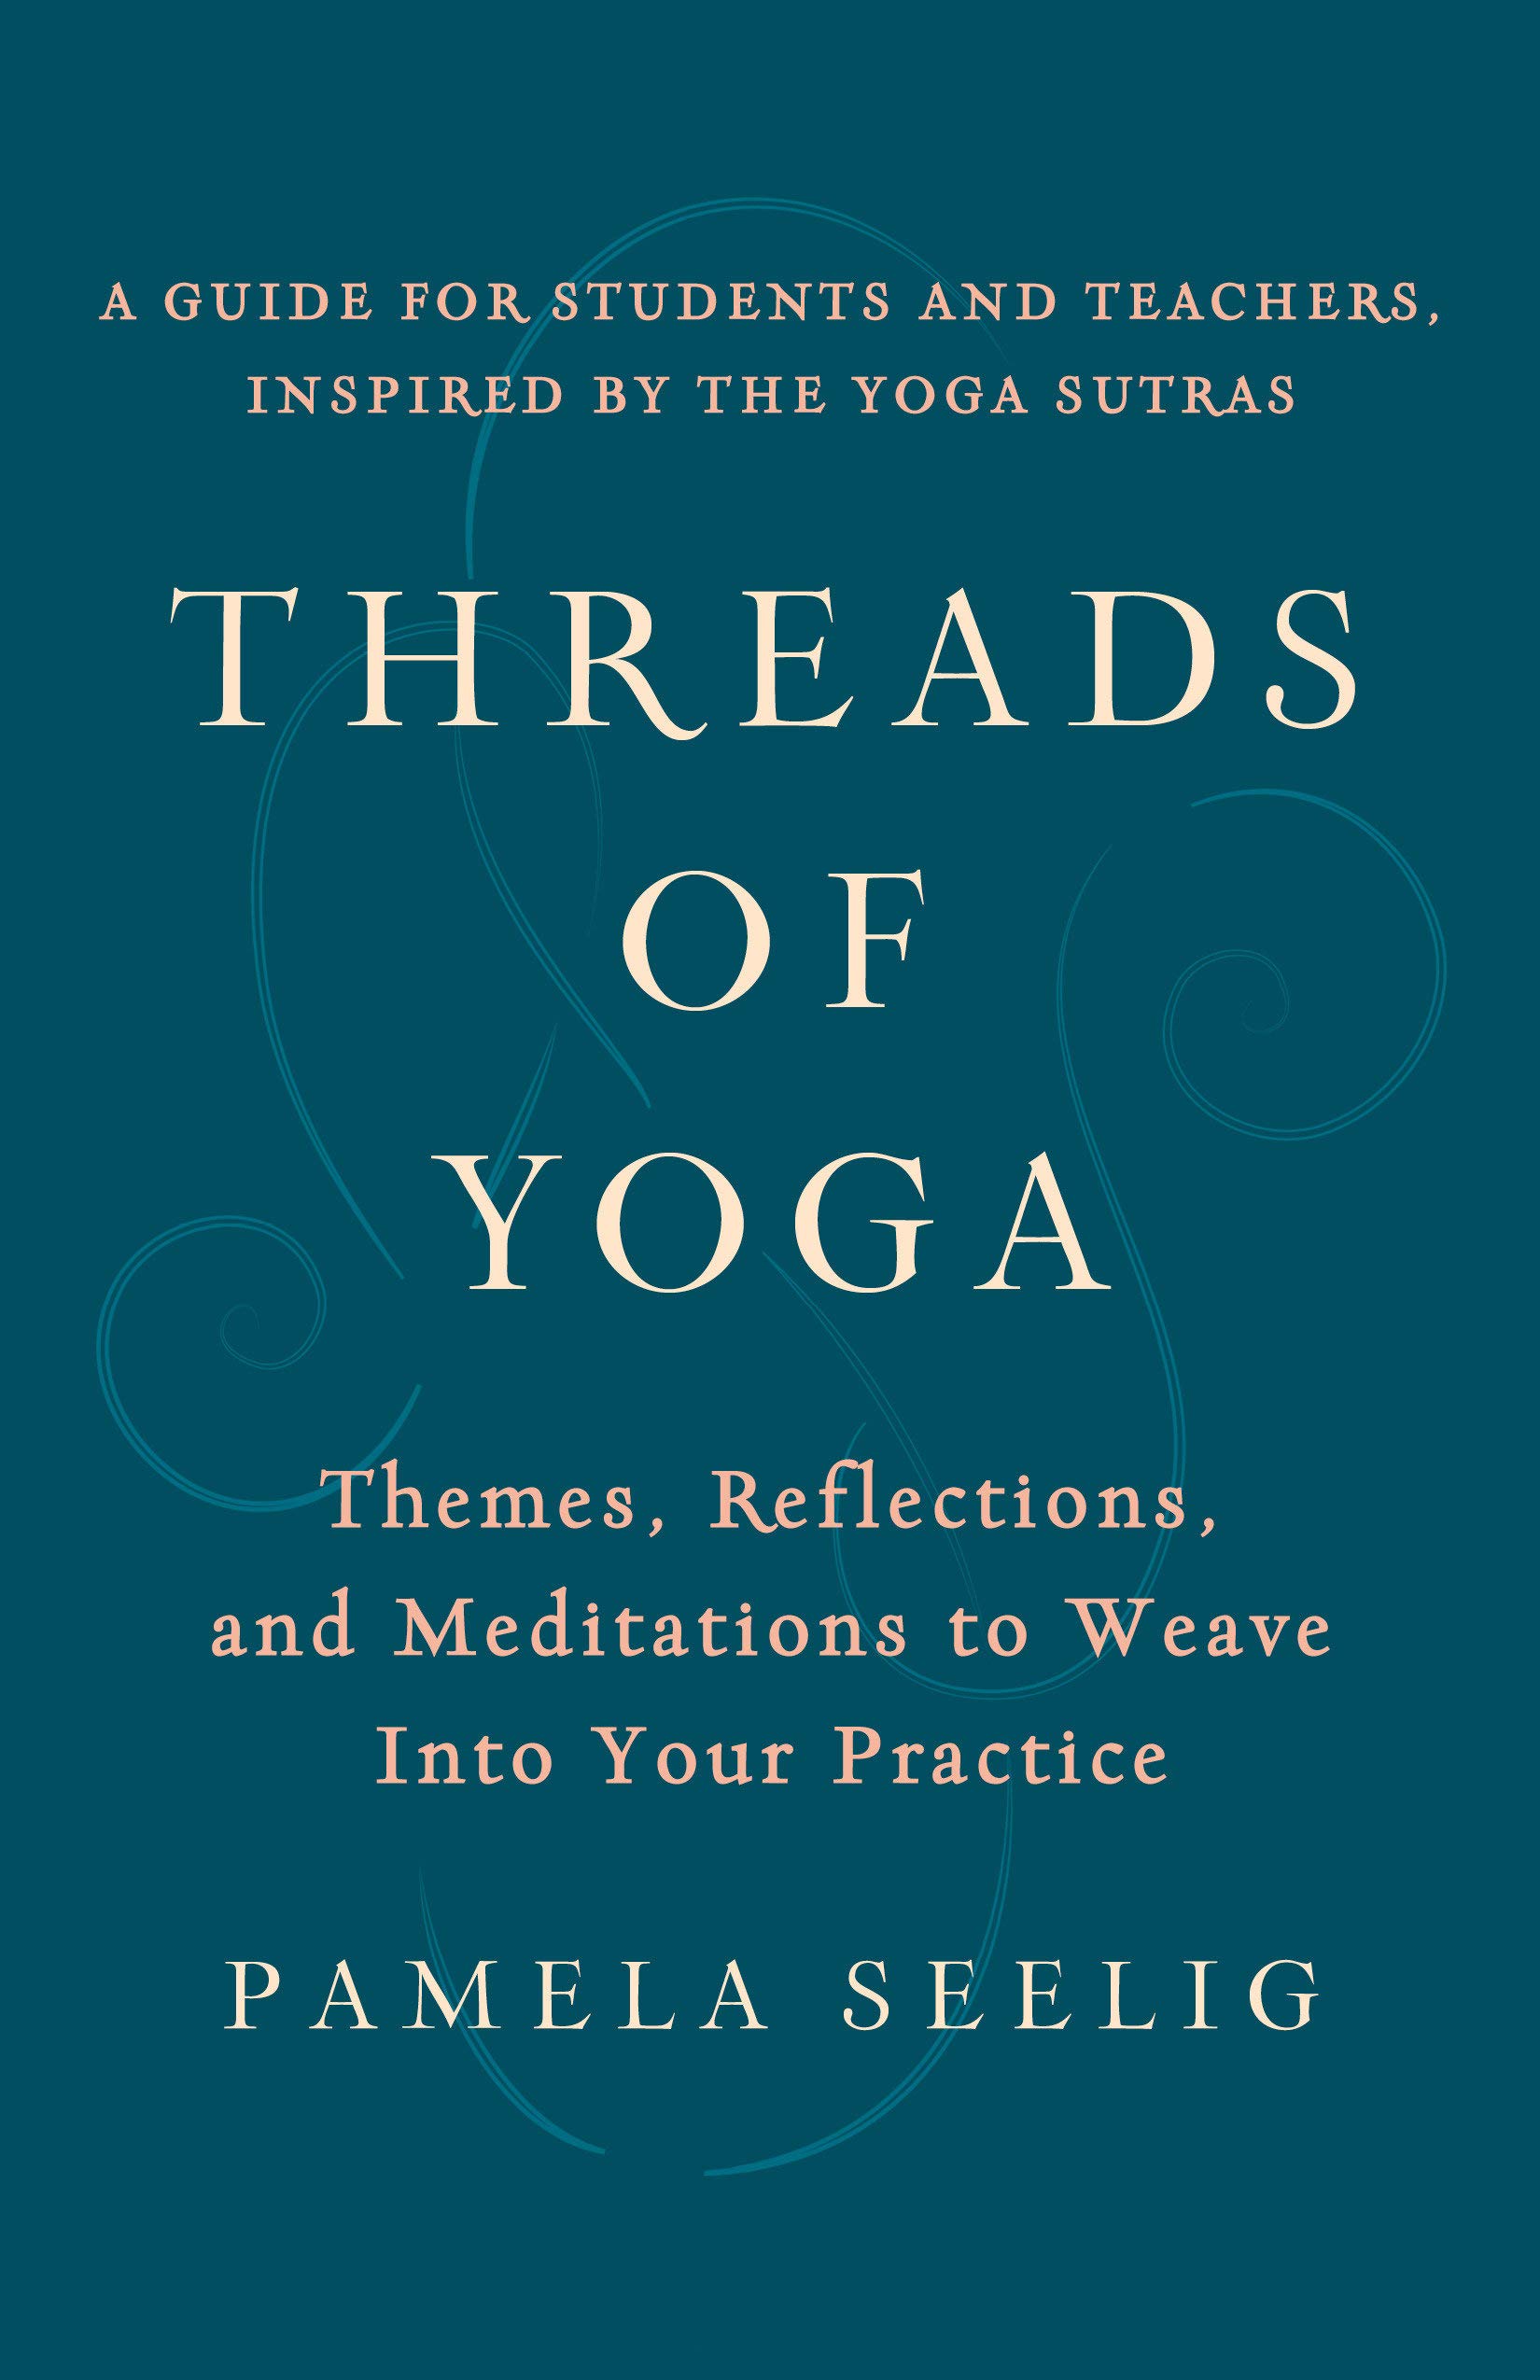 Threads of Yoga: Themes, Reflections, and Meditations To Weave Into Your Practice